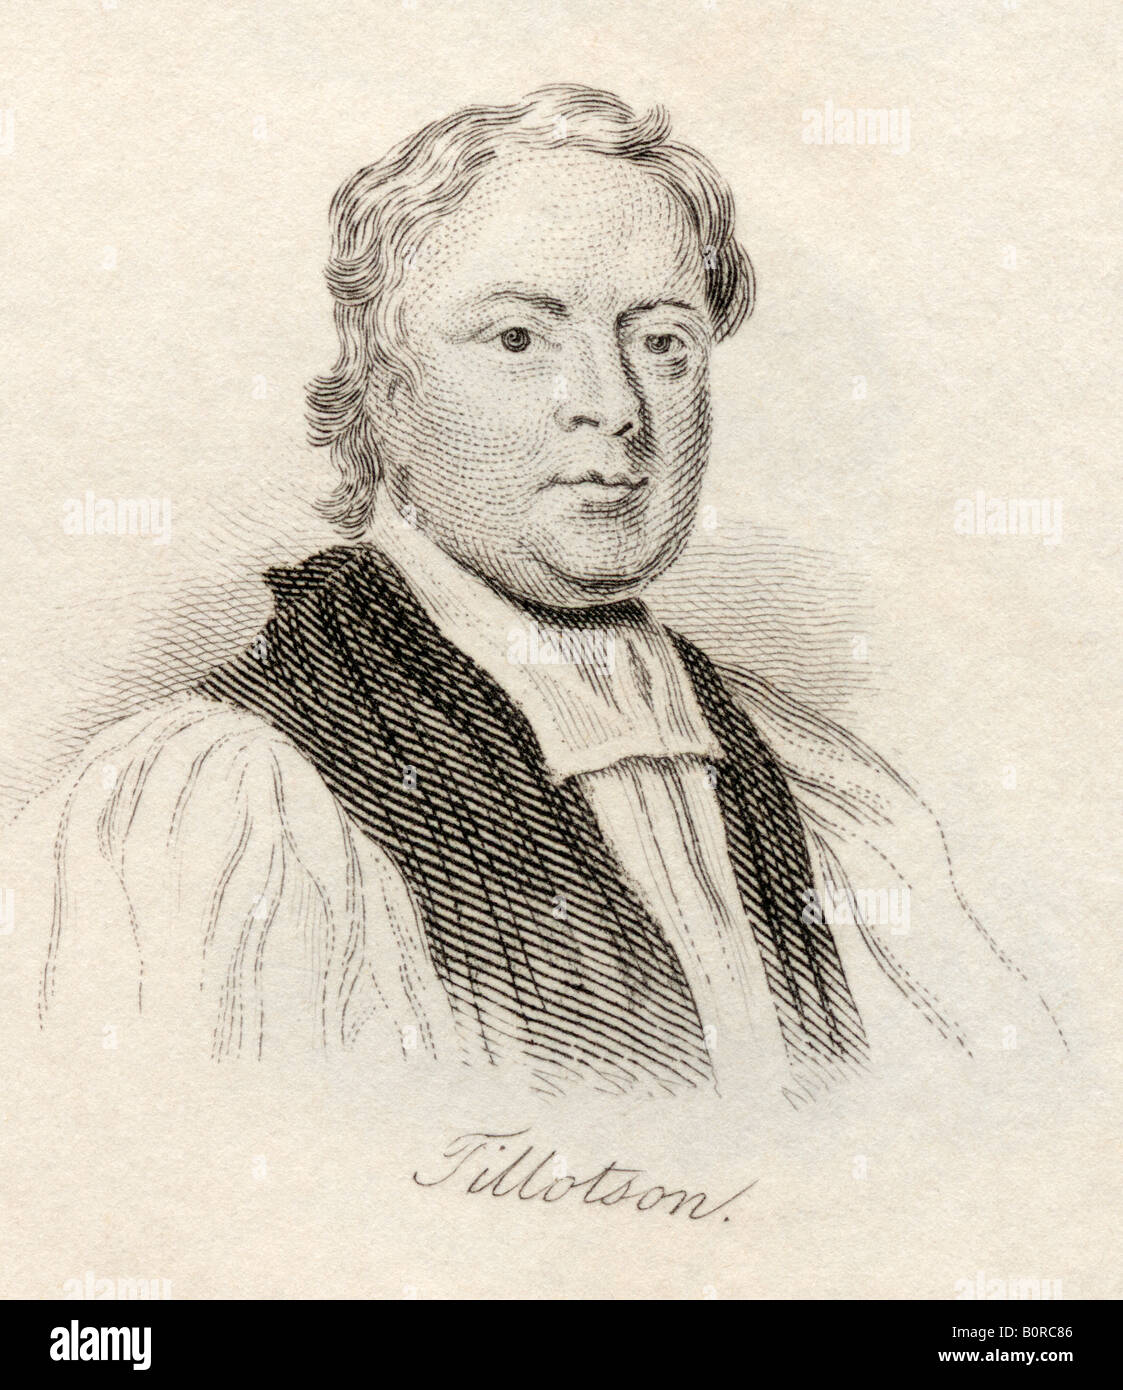 John Tillotson, 1630 - 1694. English prelate, archbishop of Canterbury. From the book Crabbs Historical Dictionary, published 1825. Stock Photo